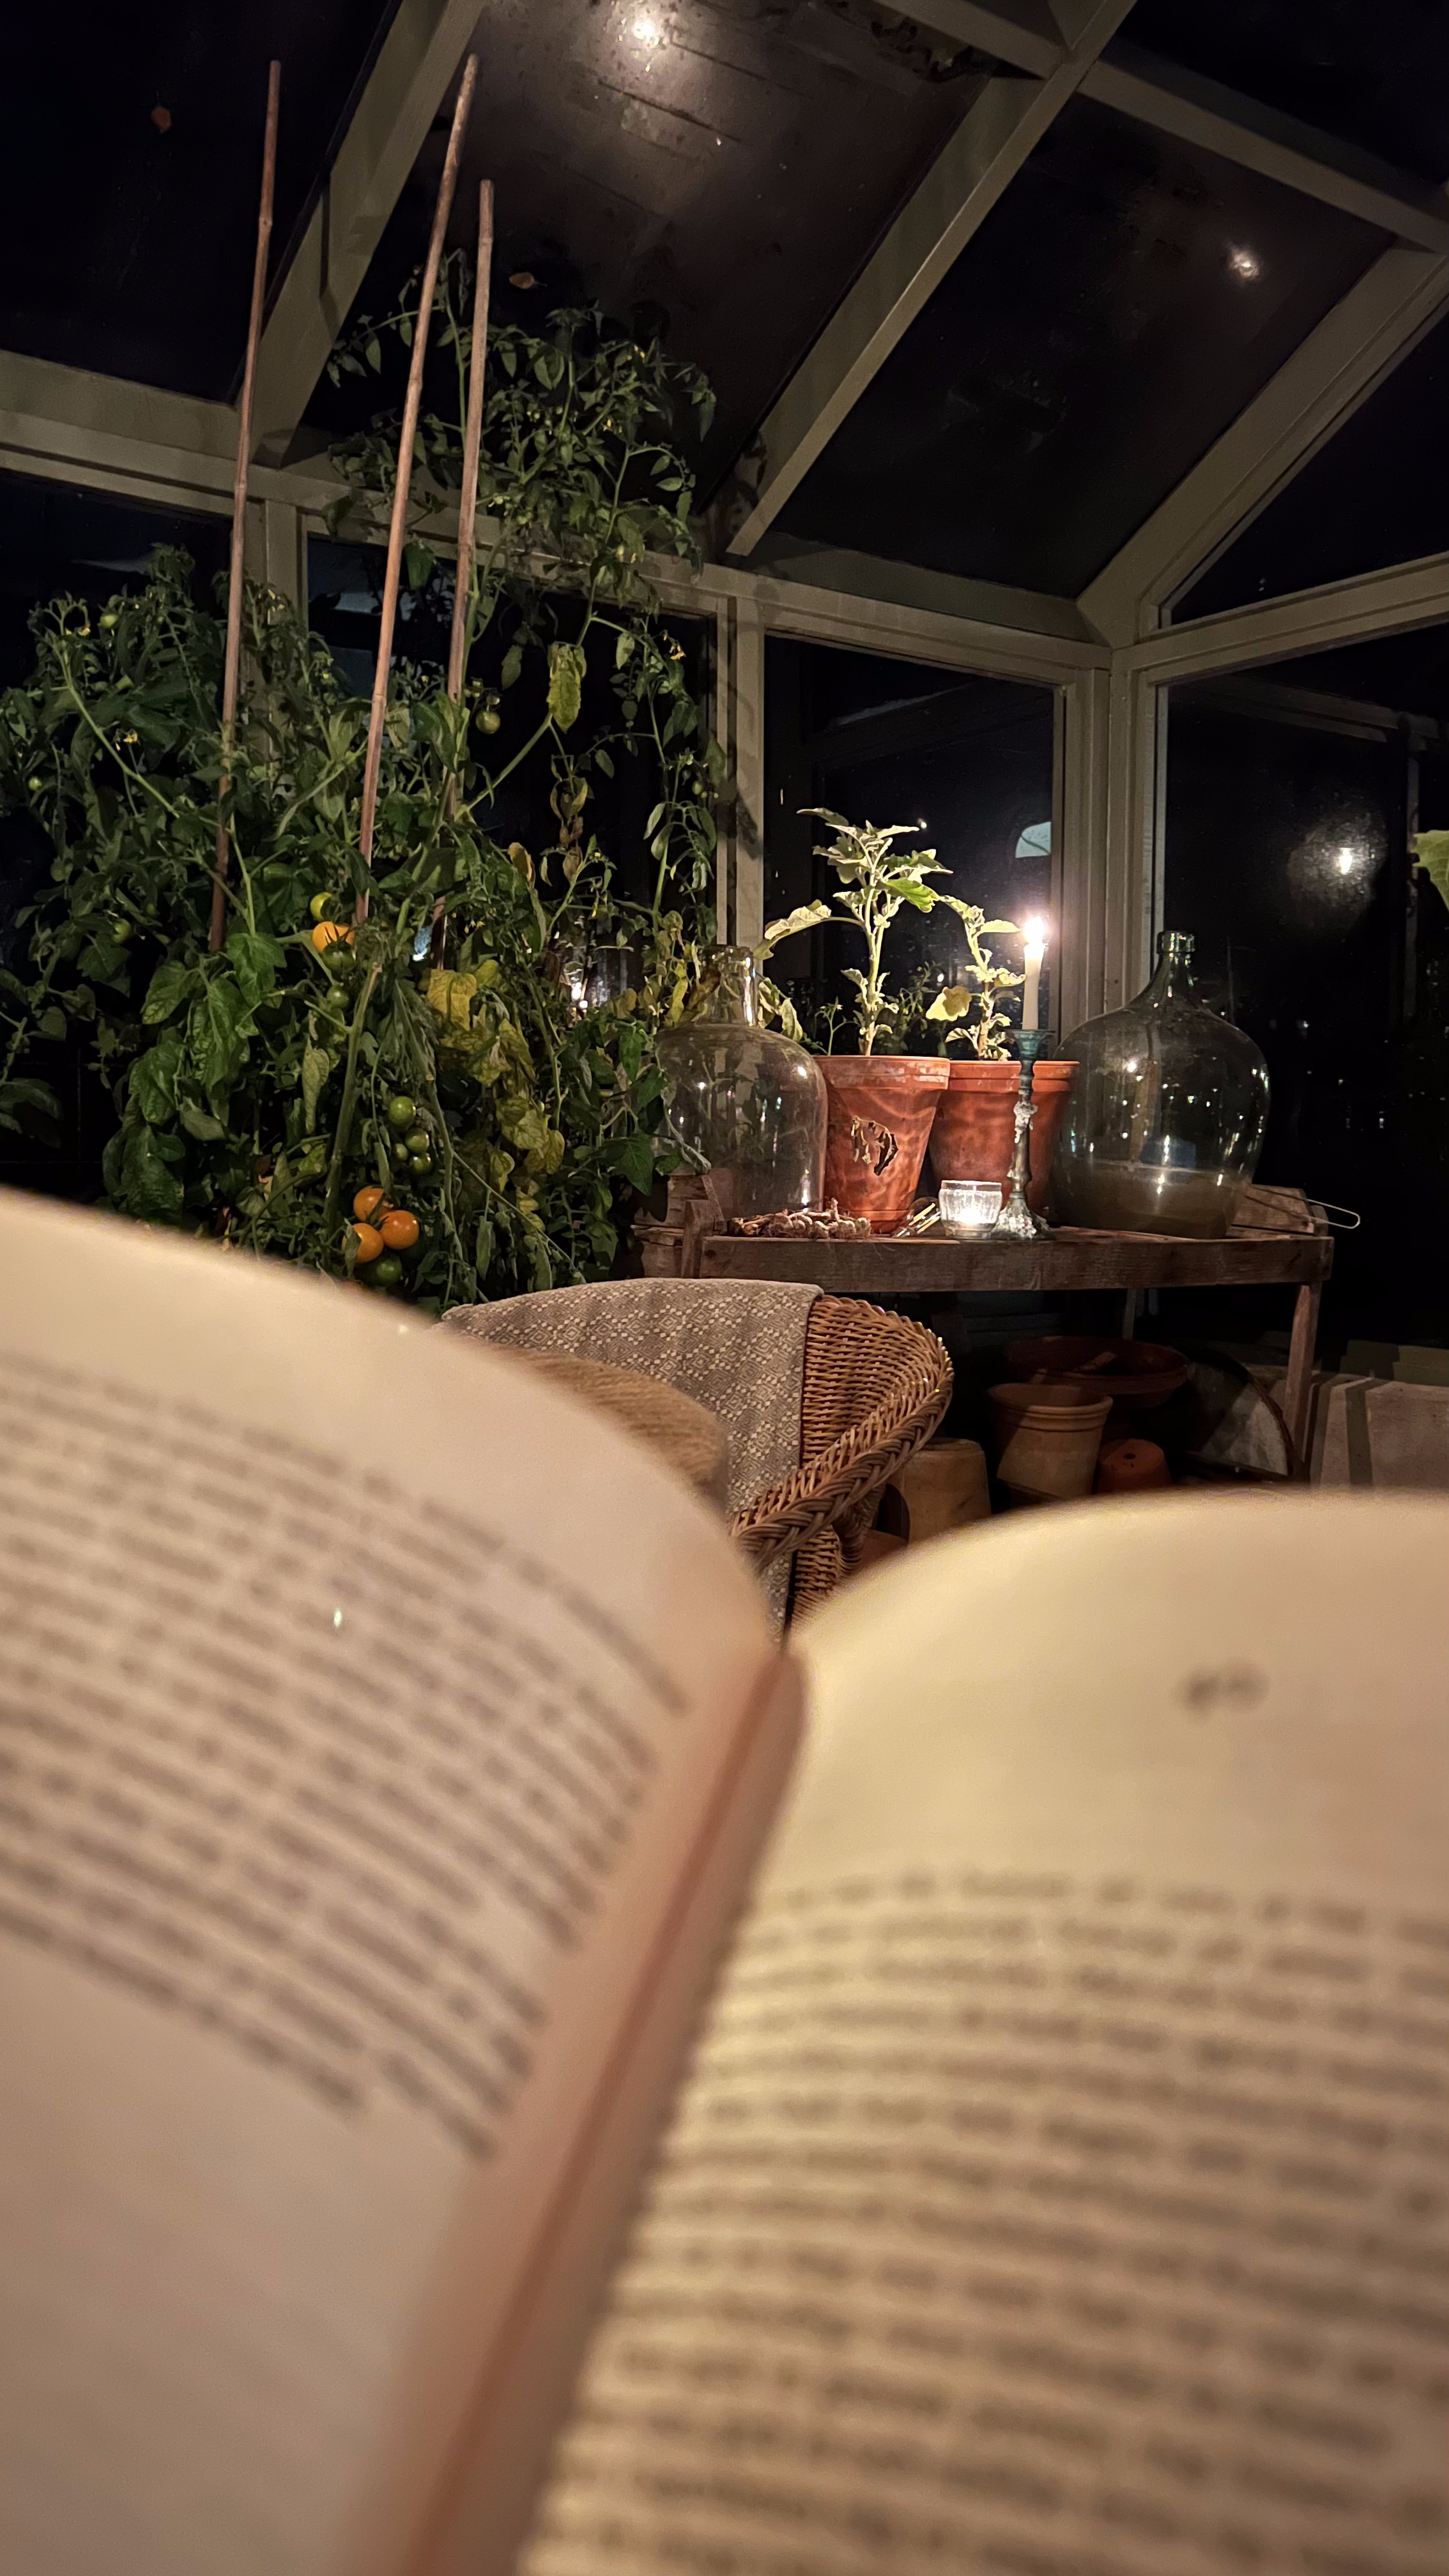 An opan book in the greenhouse late evening